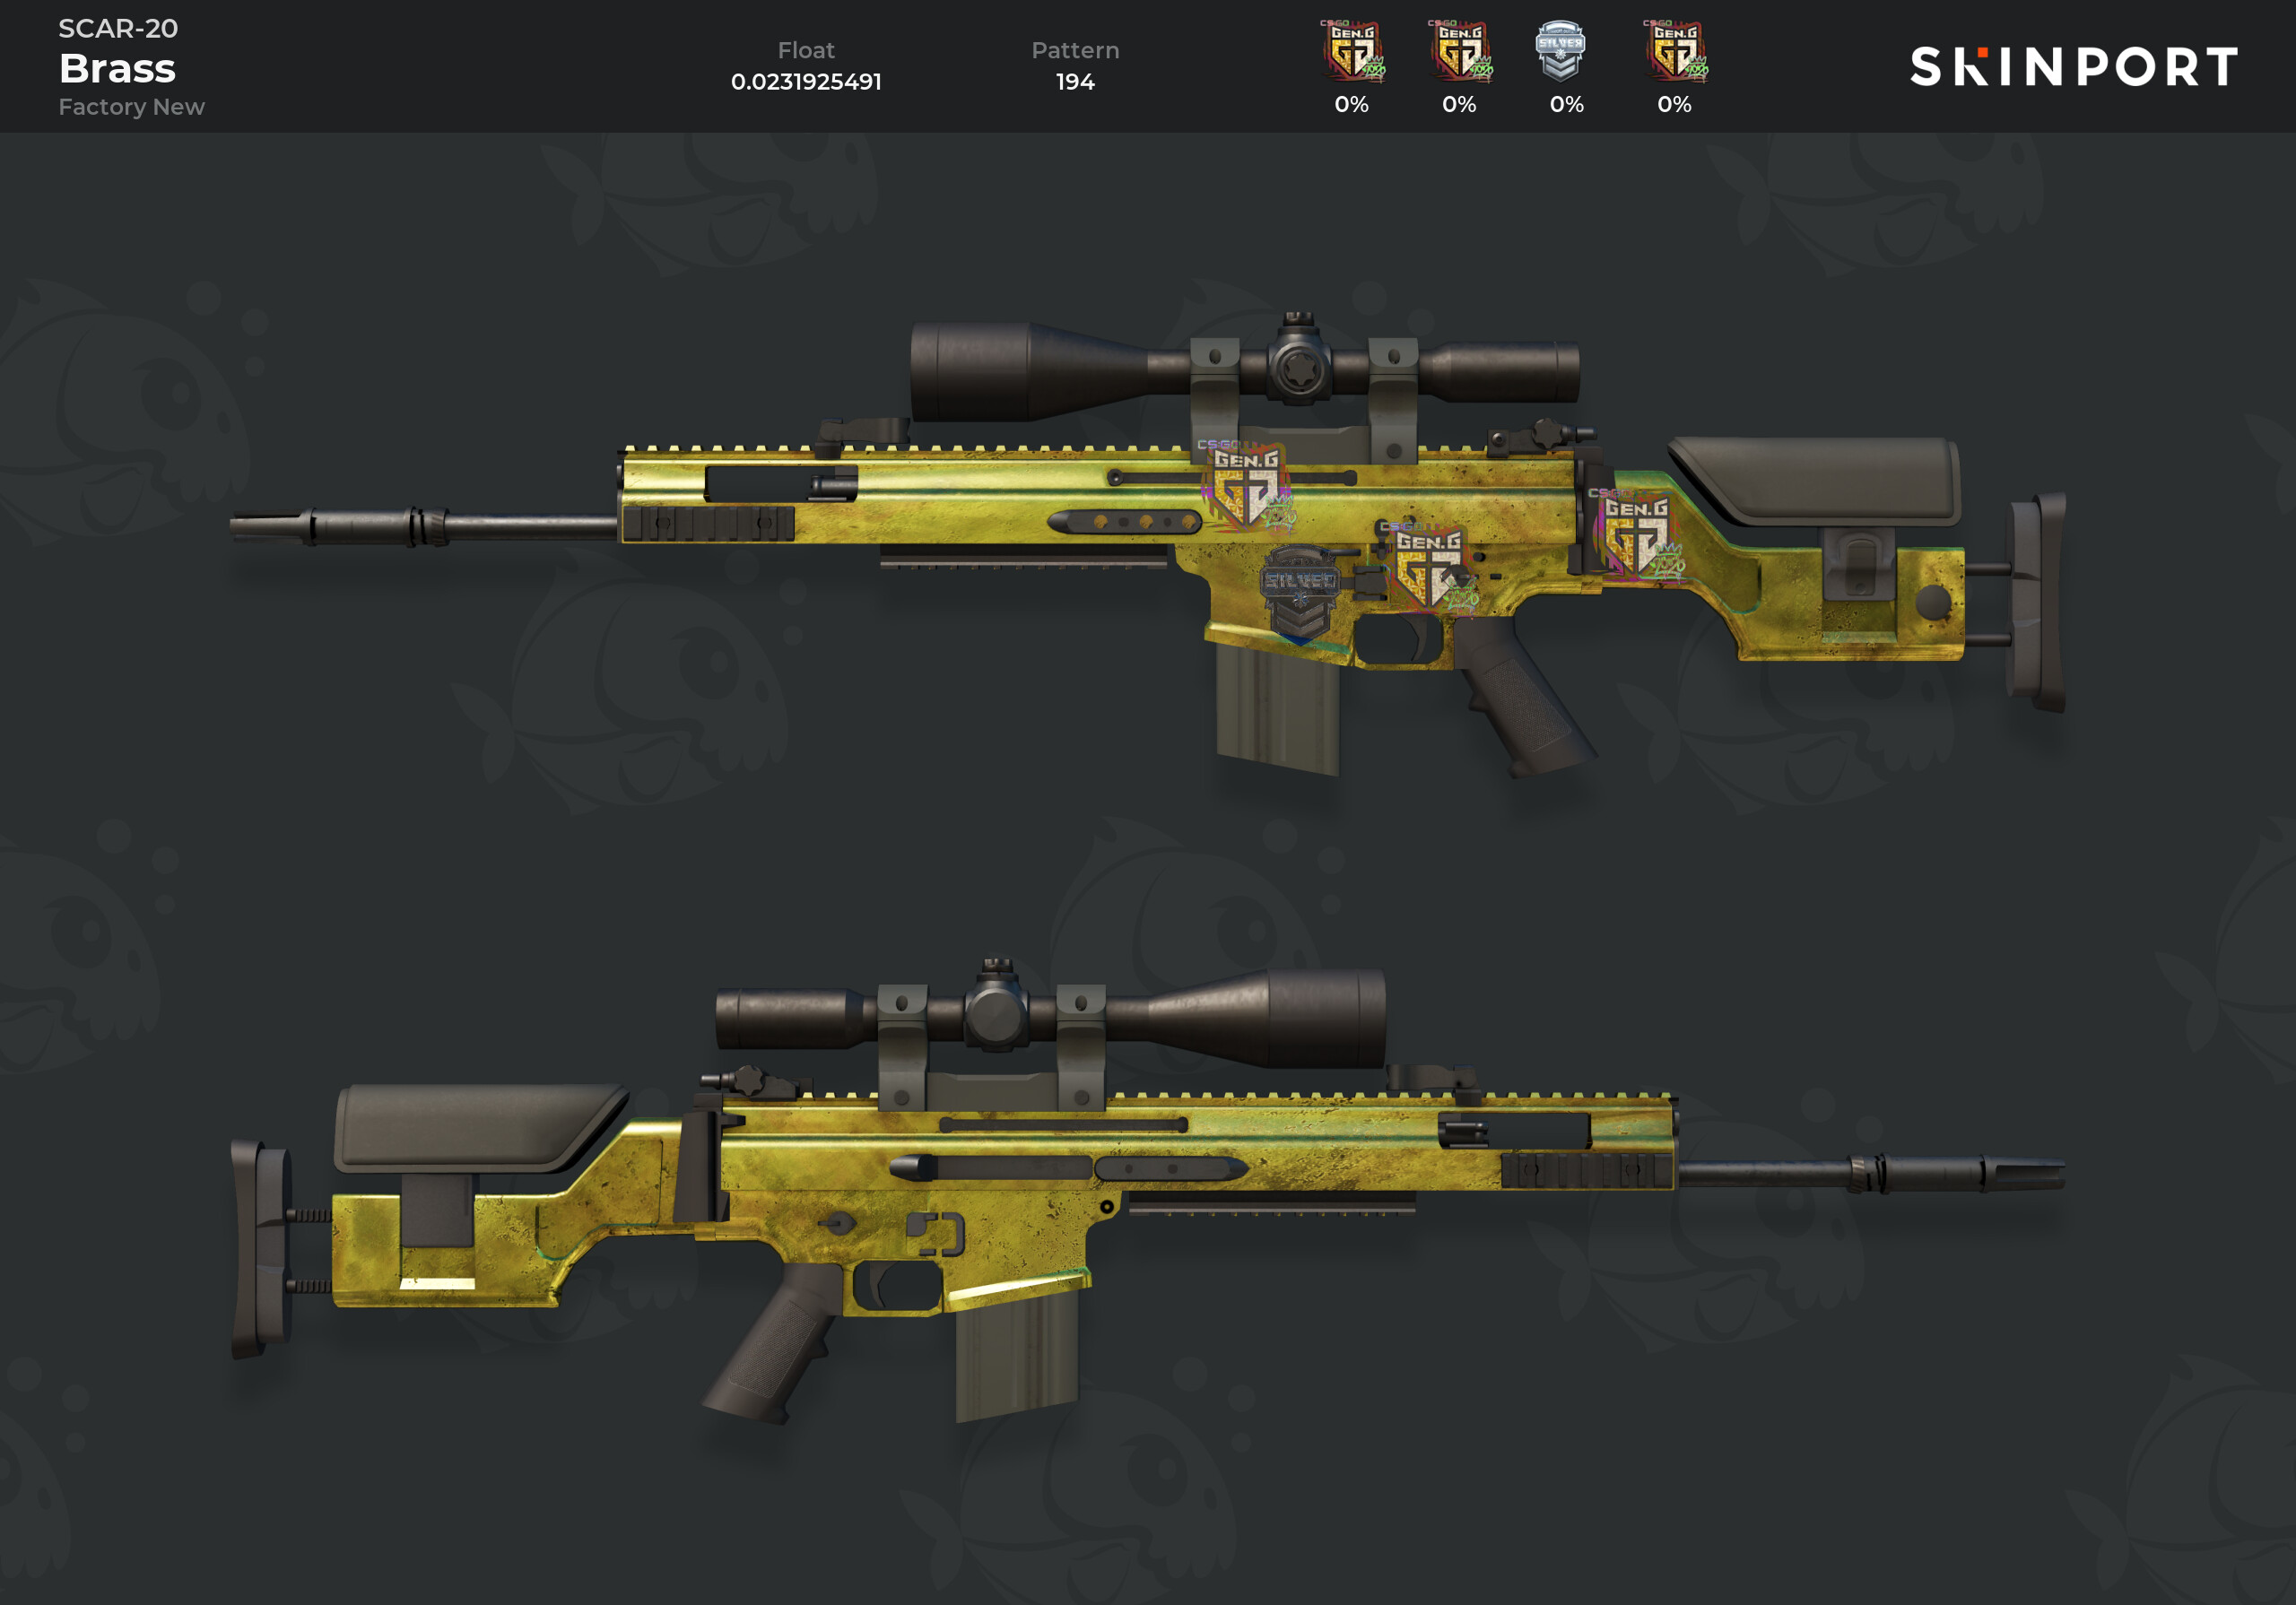 SCAR-20 Contractor cs go skin download the last version for android